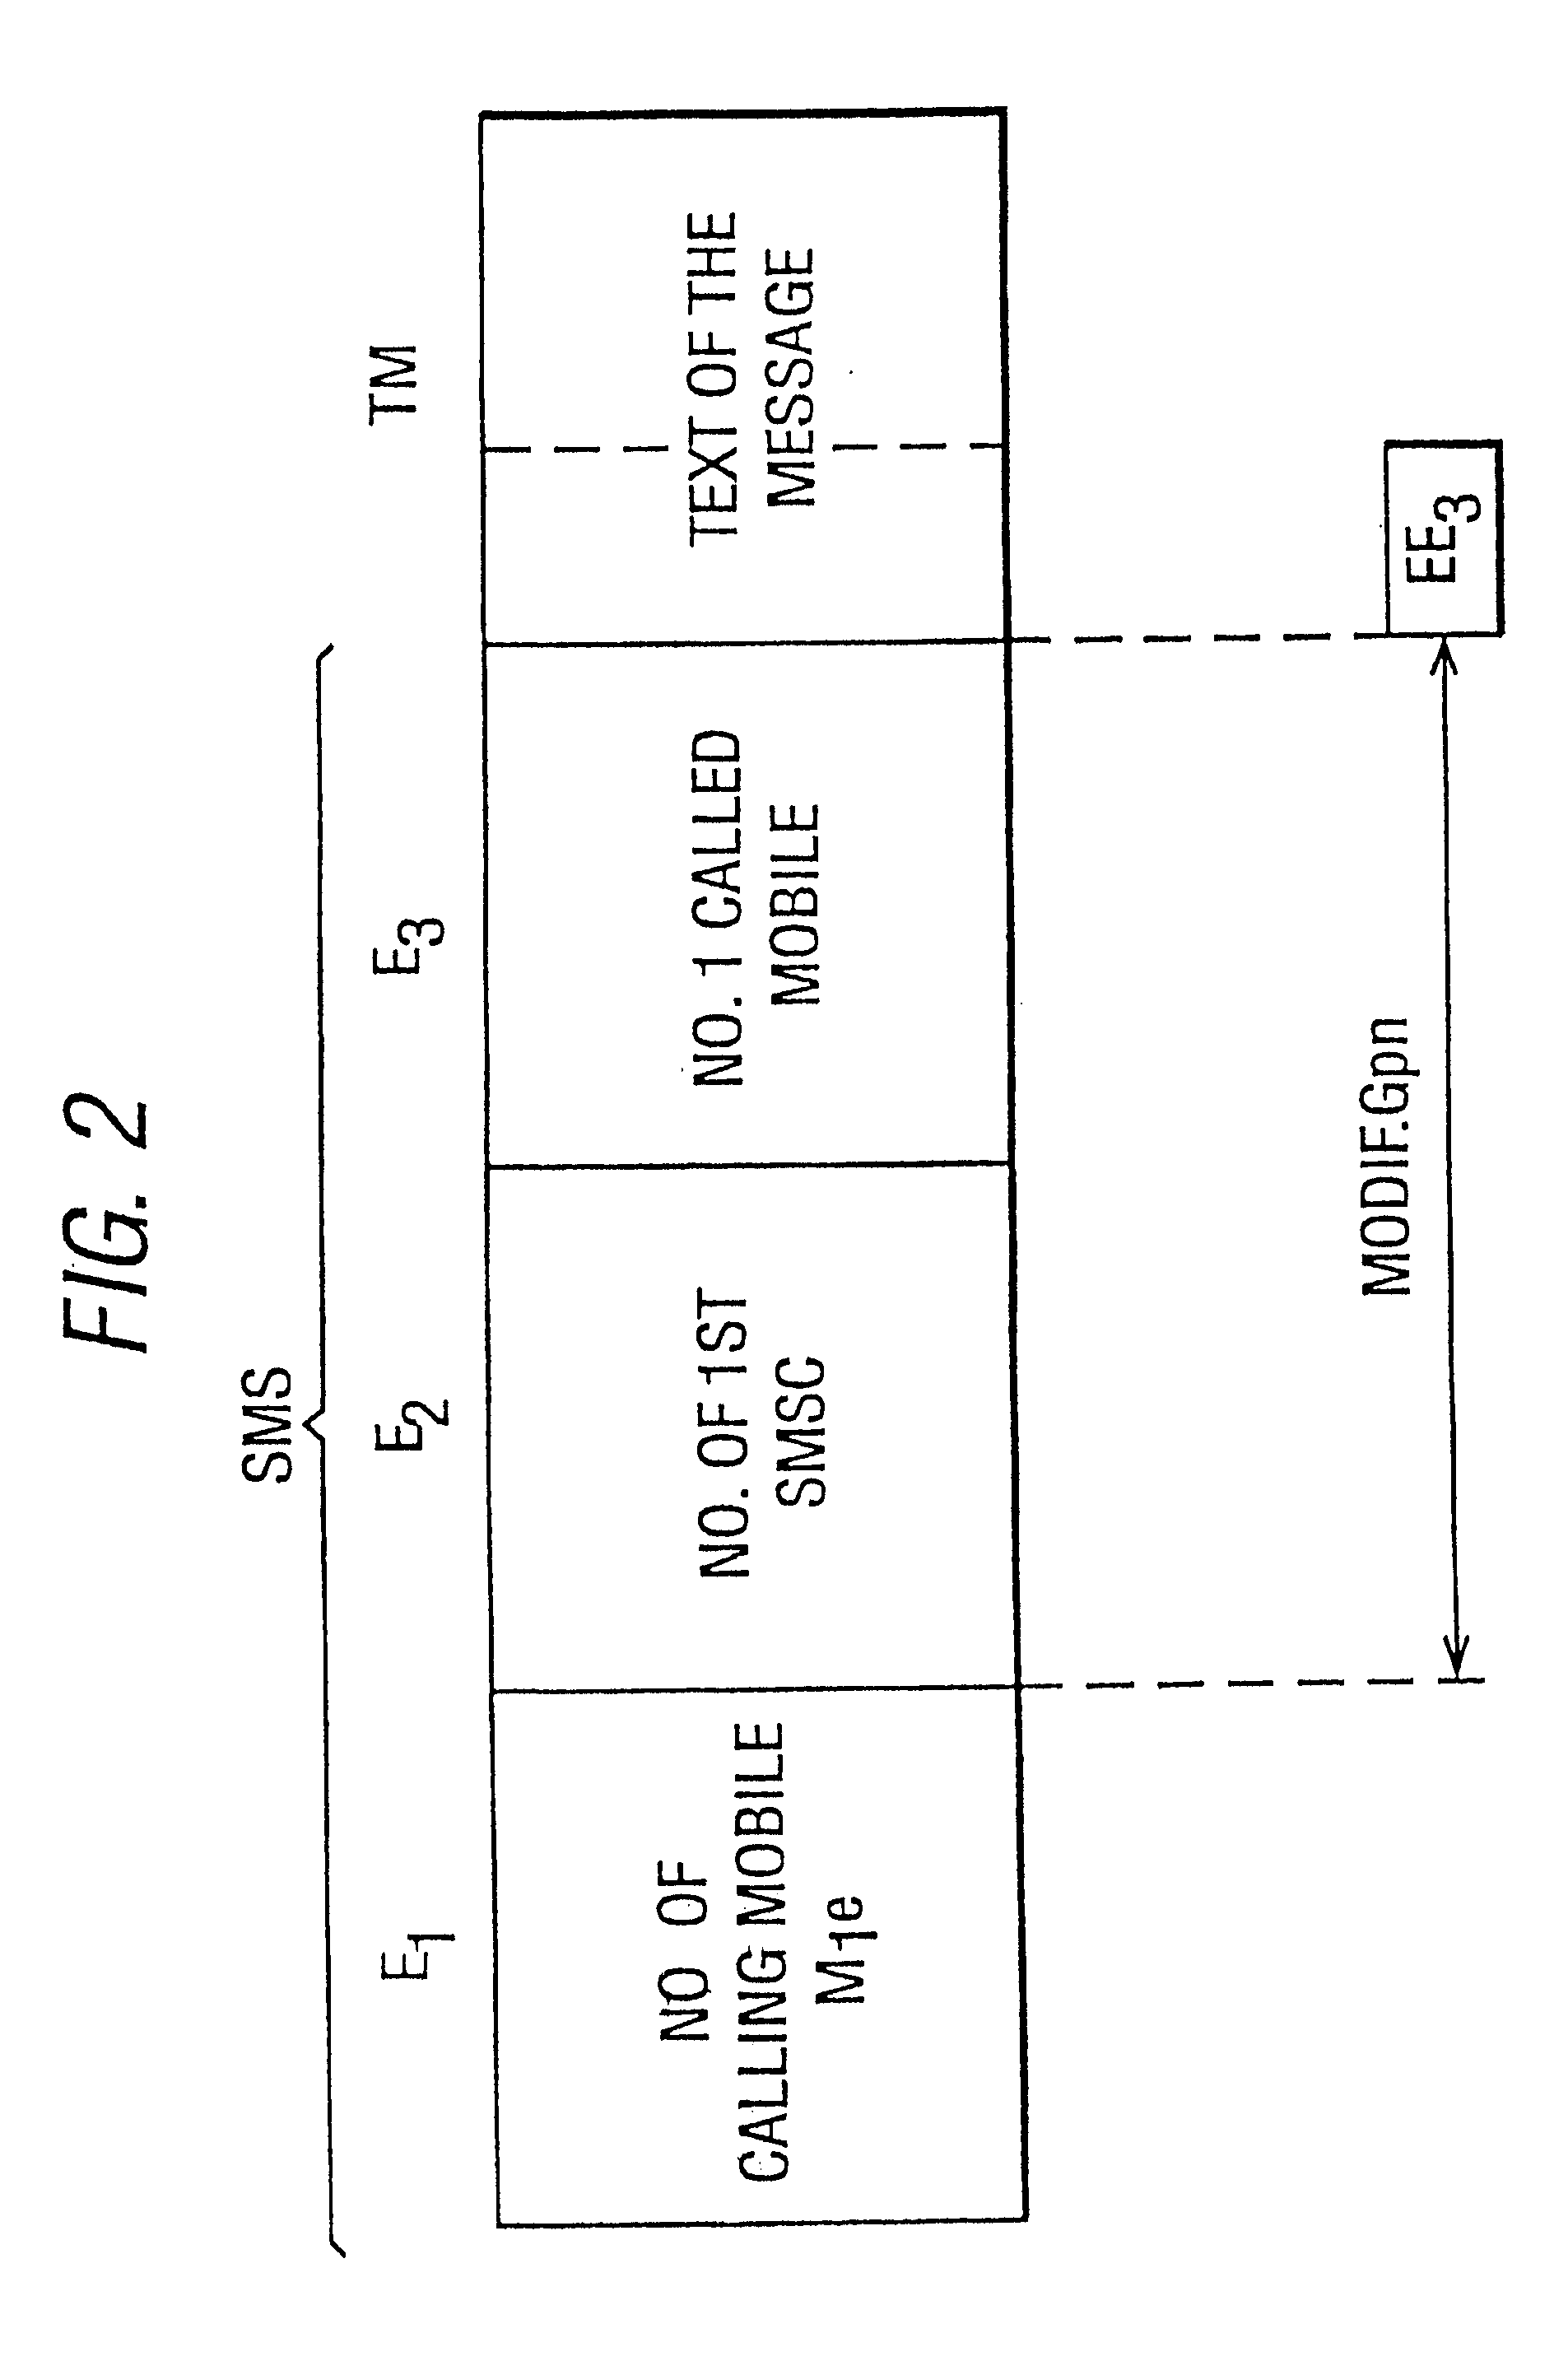 Dynamic routing system for a short message sent by a calling party using a mobile phone